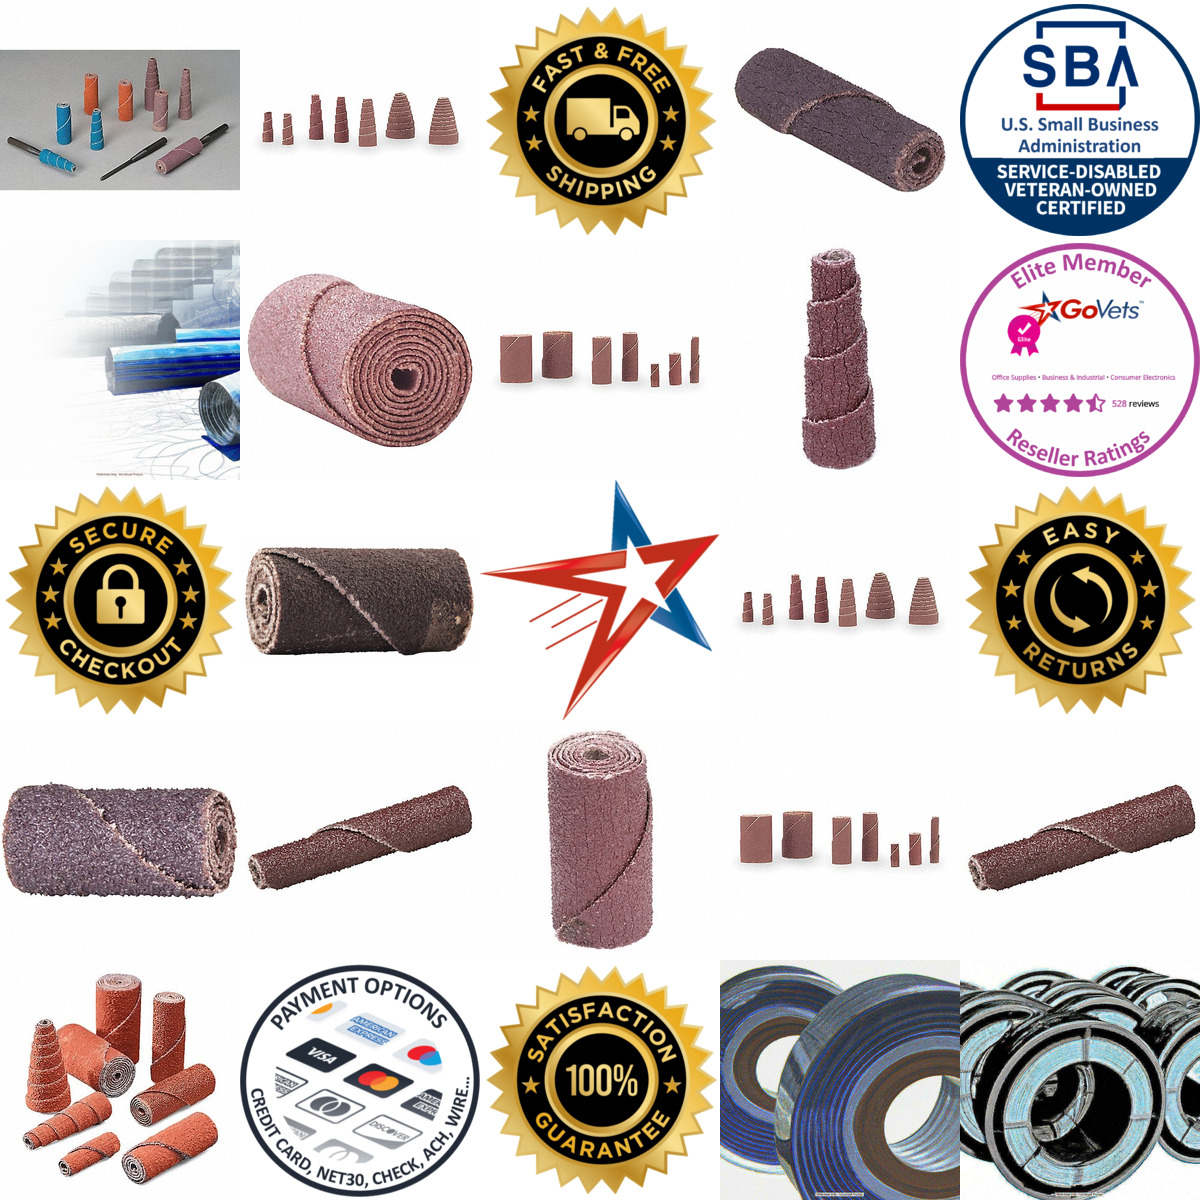 A selection of Abrasive Cartridge Rolls products on GoVets